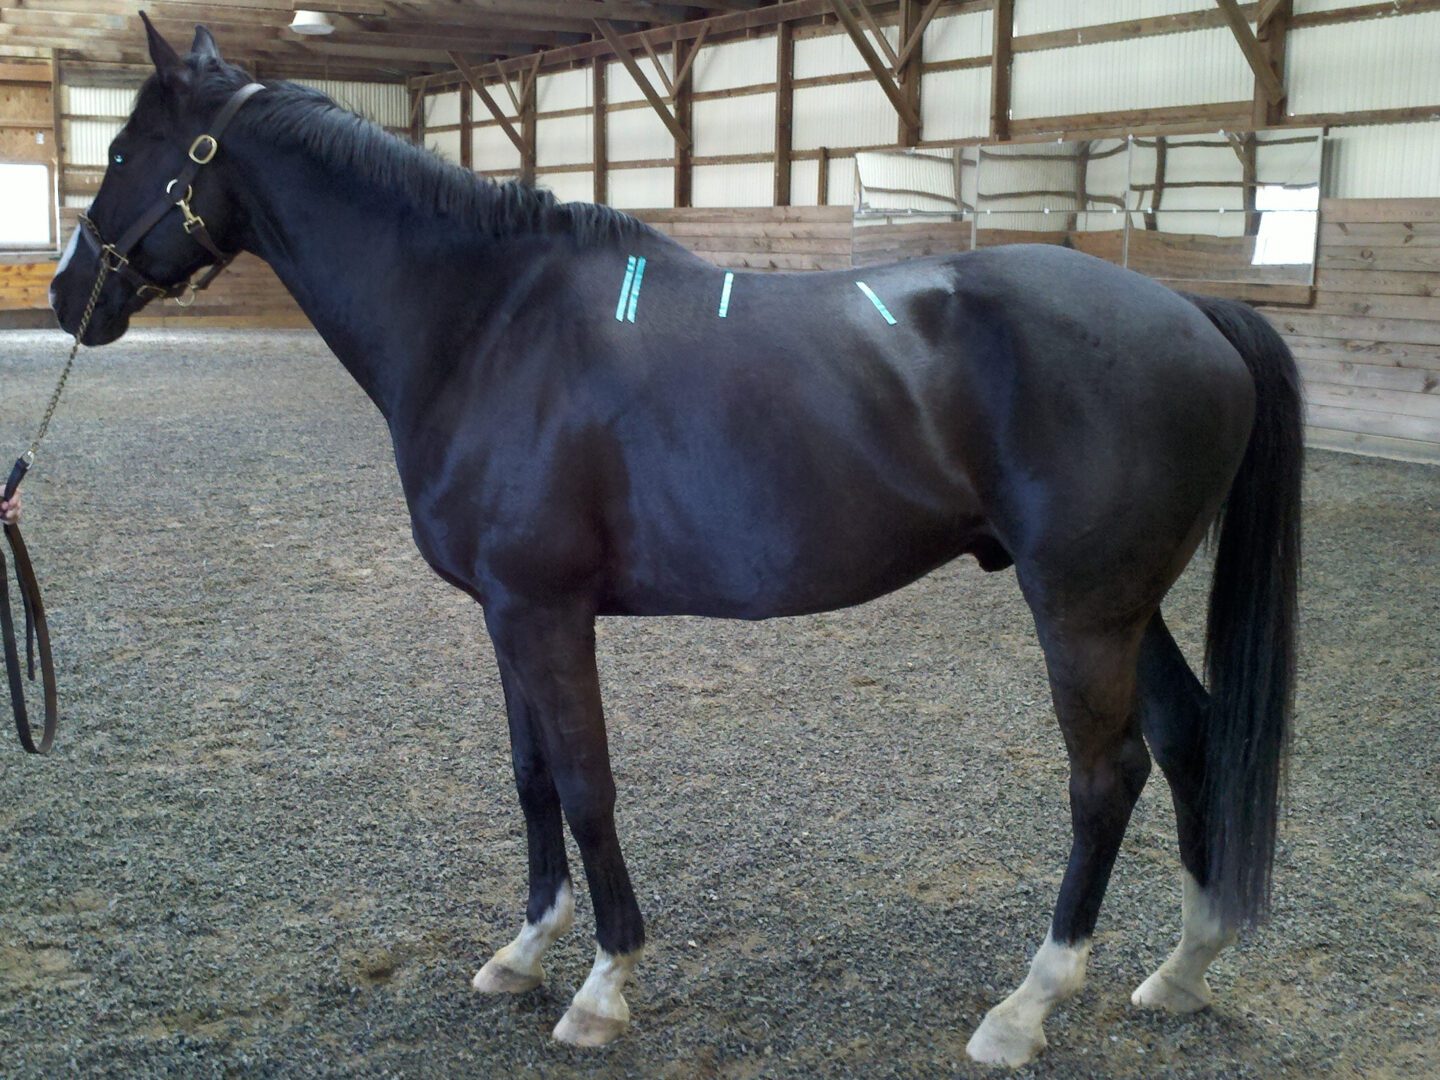 Left side profile of a black horse with wither tracing area markings